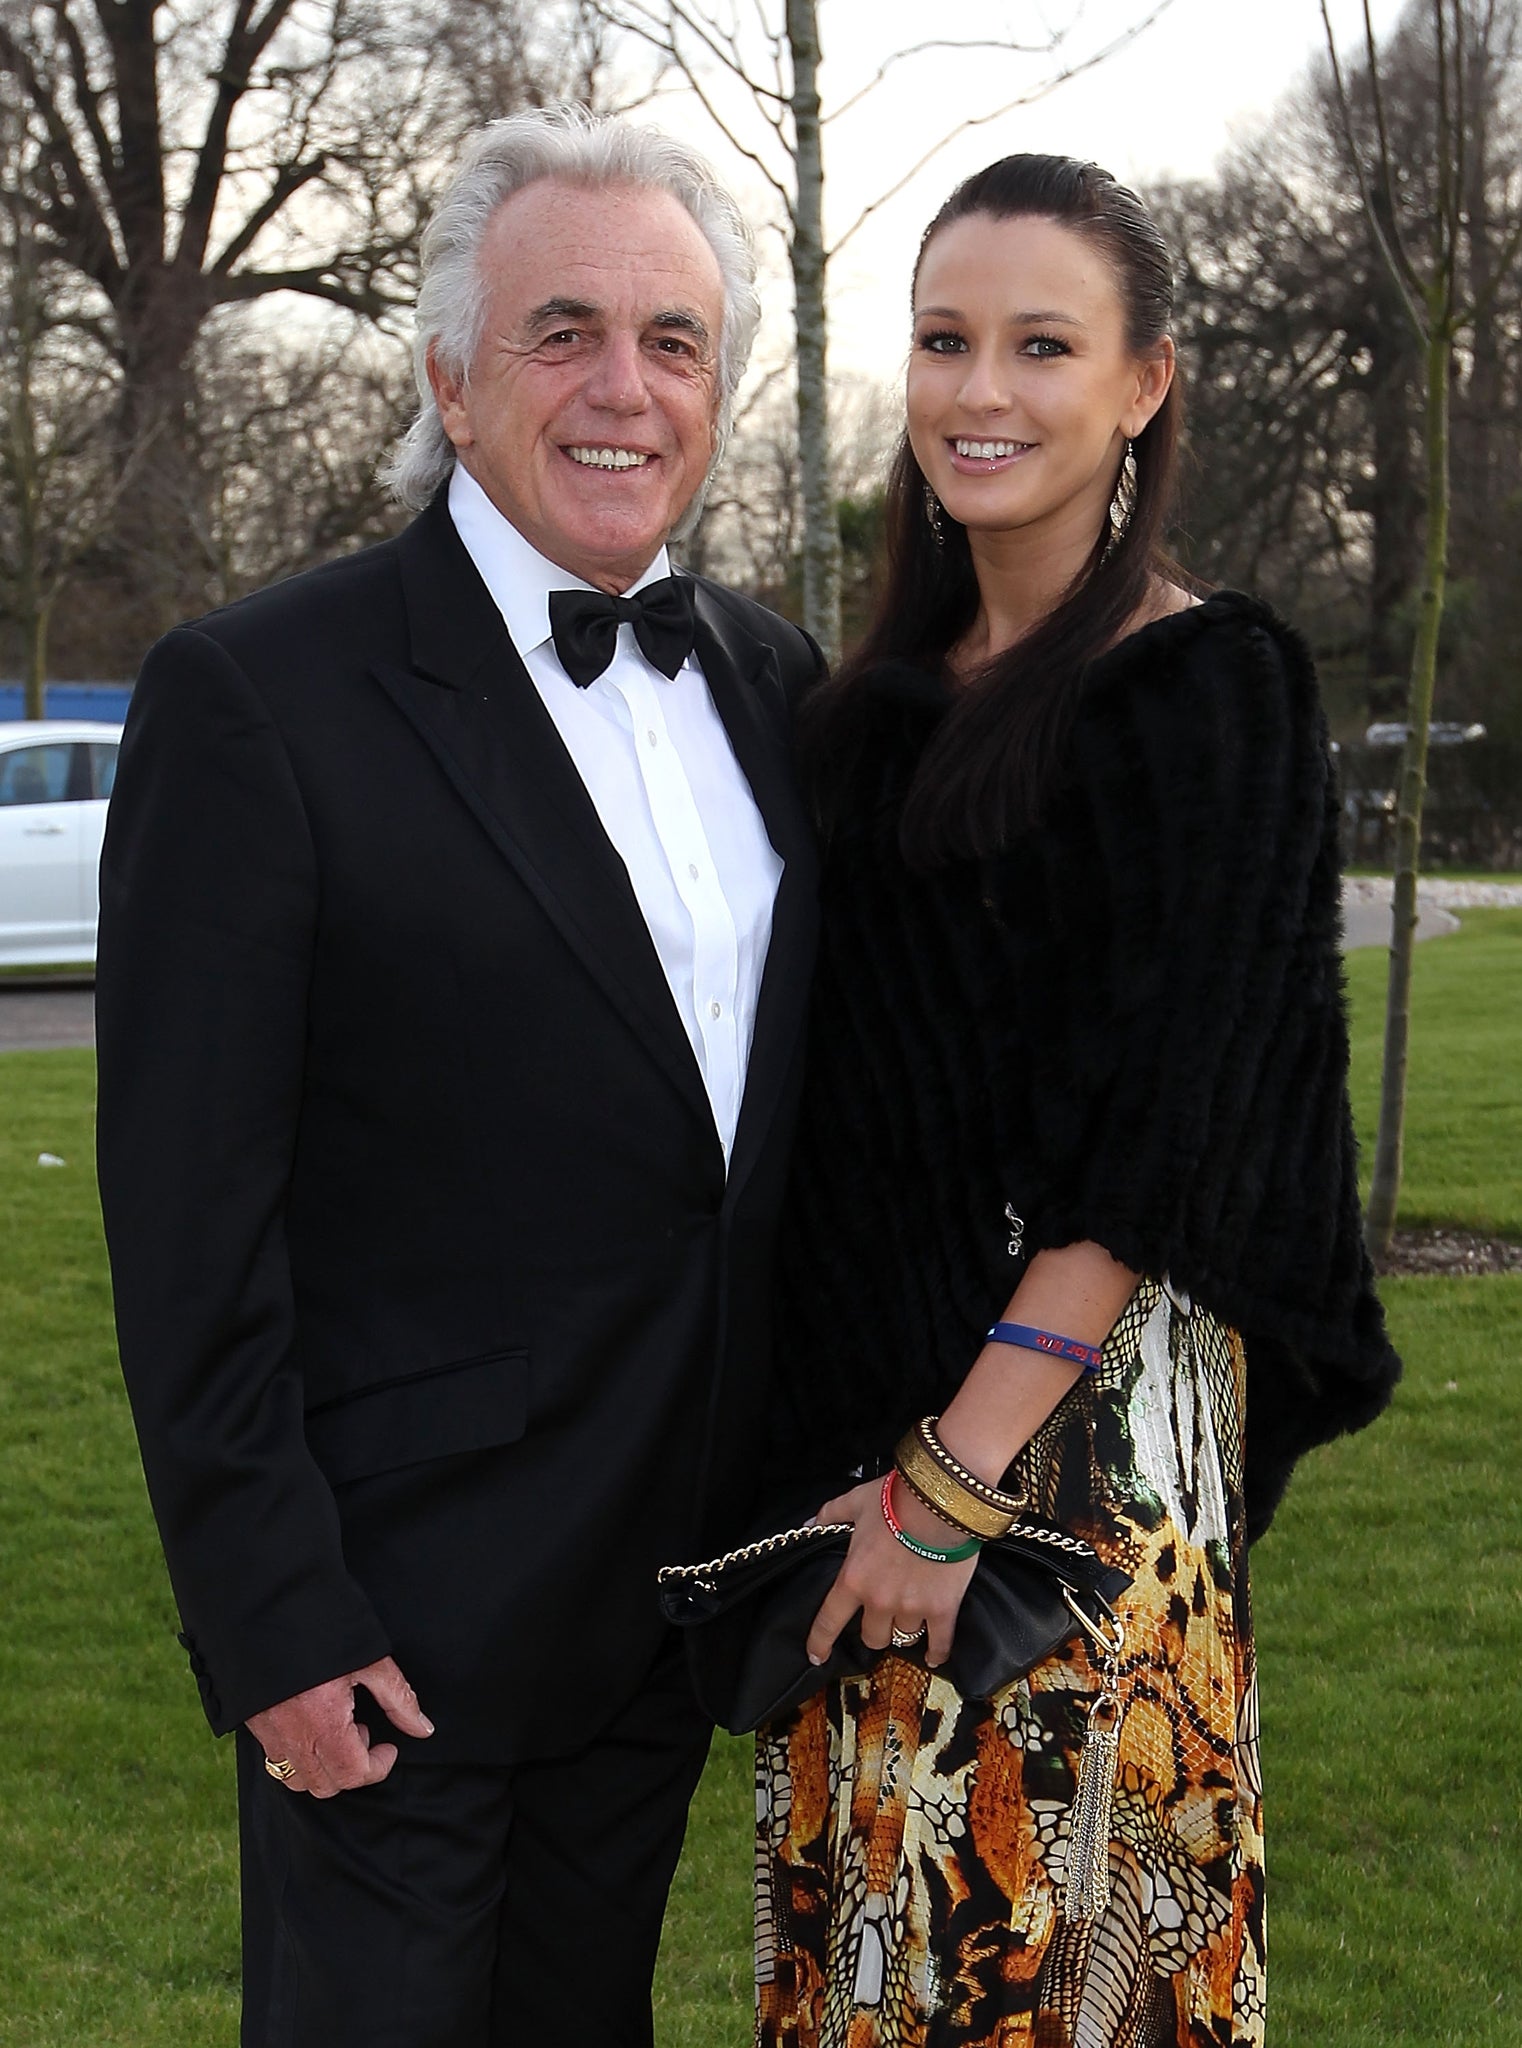 Peter Stringfellow and his wife Bella are expecting a child together